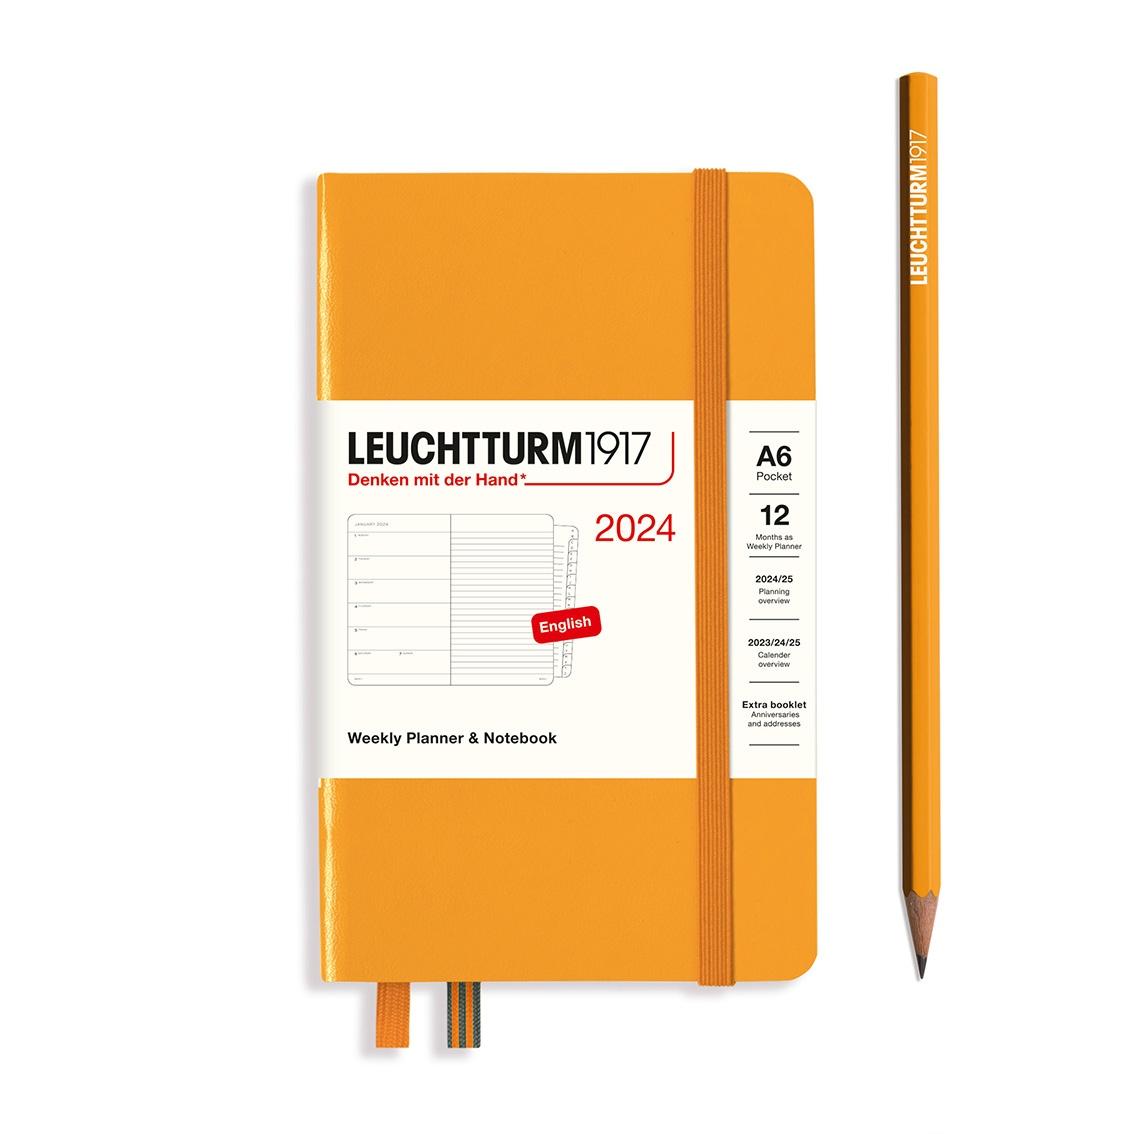 hardcover weekly planner and notebook pocket rising sun by Leuchtturm1917